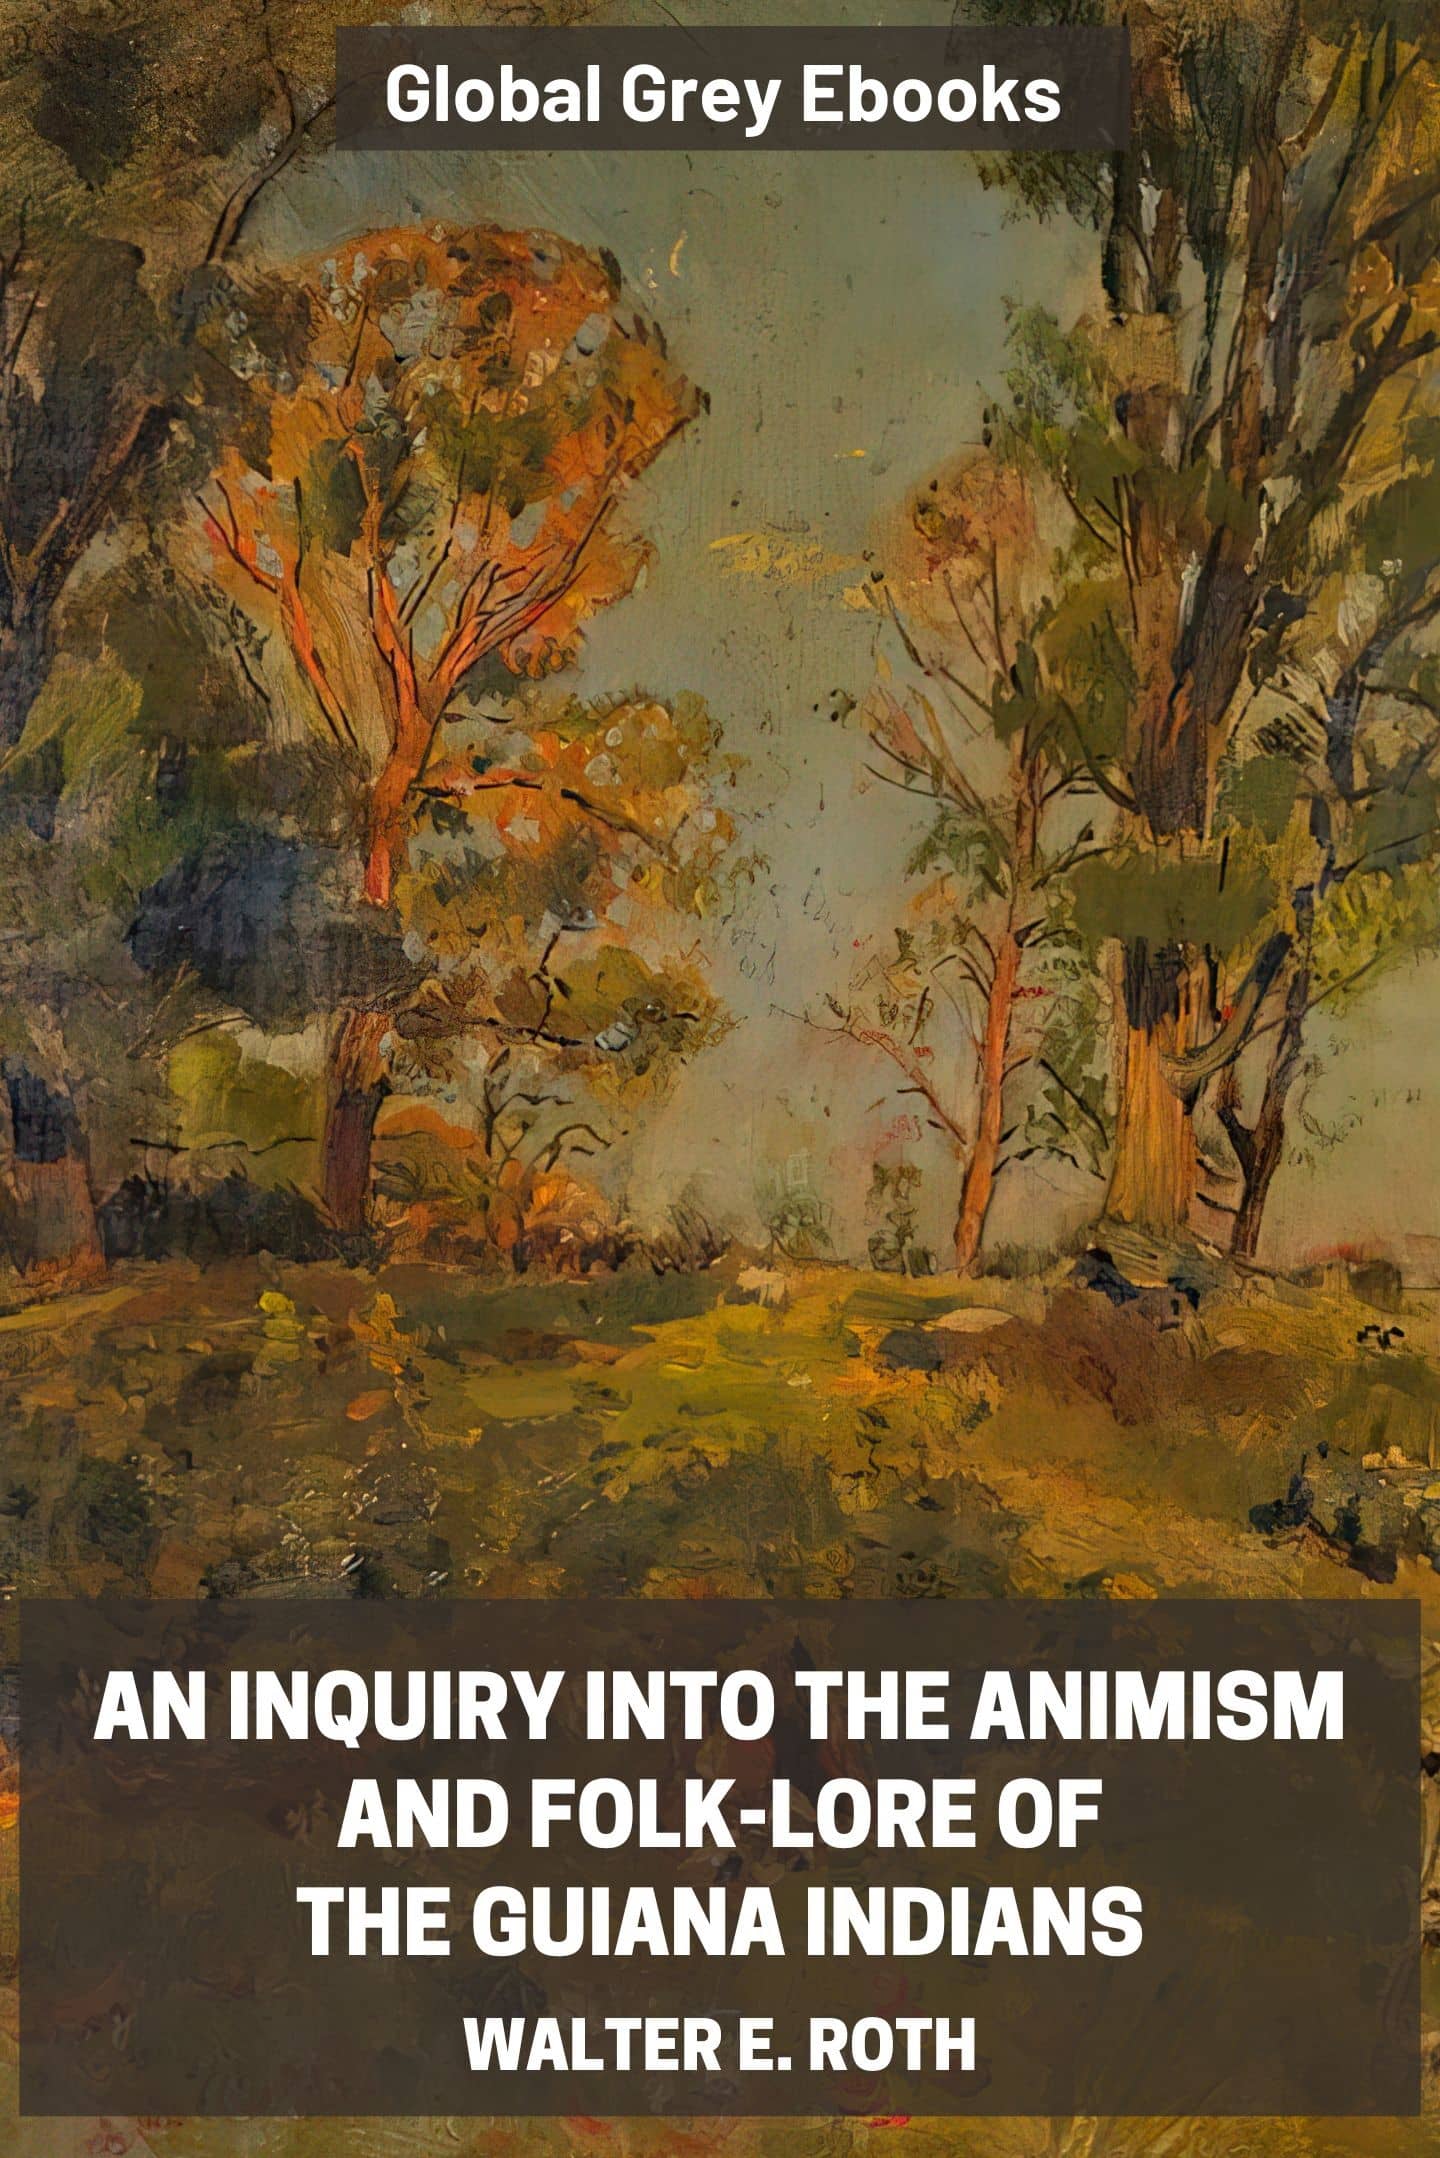 An Inquiry into the Animism and Folk-Lore of the Guiana Indians by Walter  E. Roth - Complete text online - Global Grey ebooks